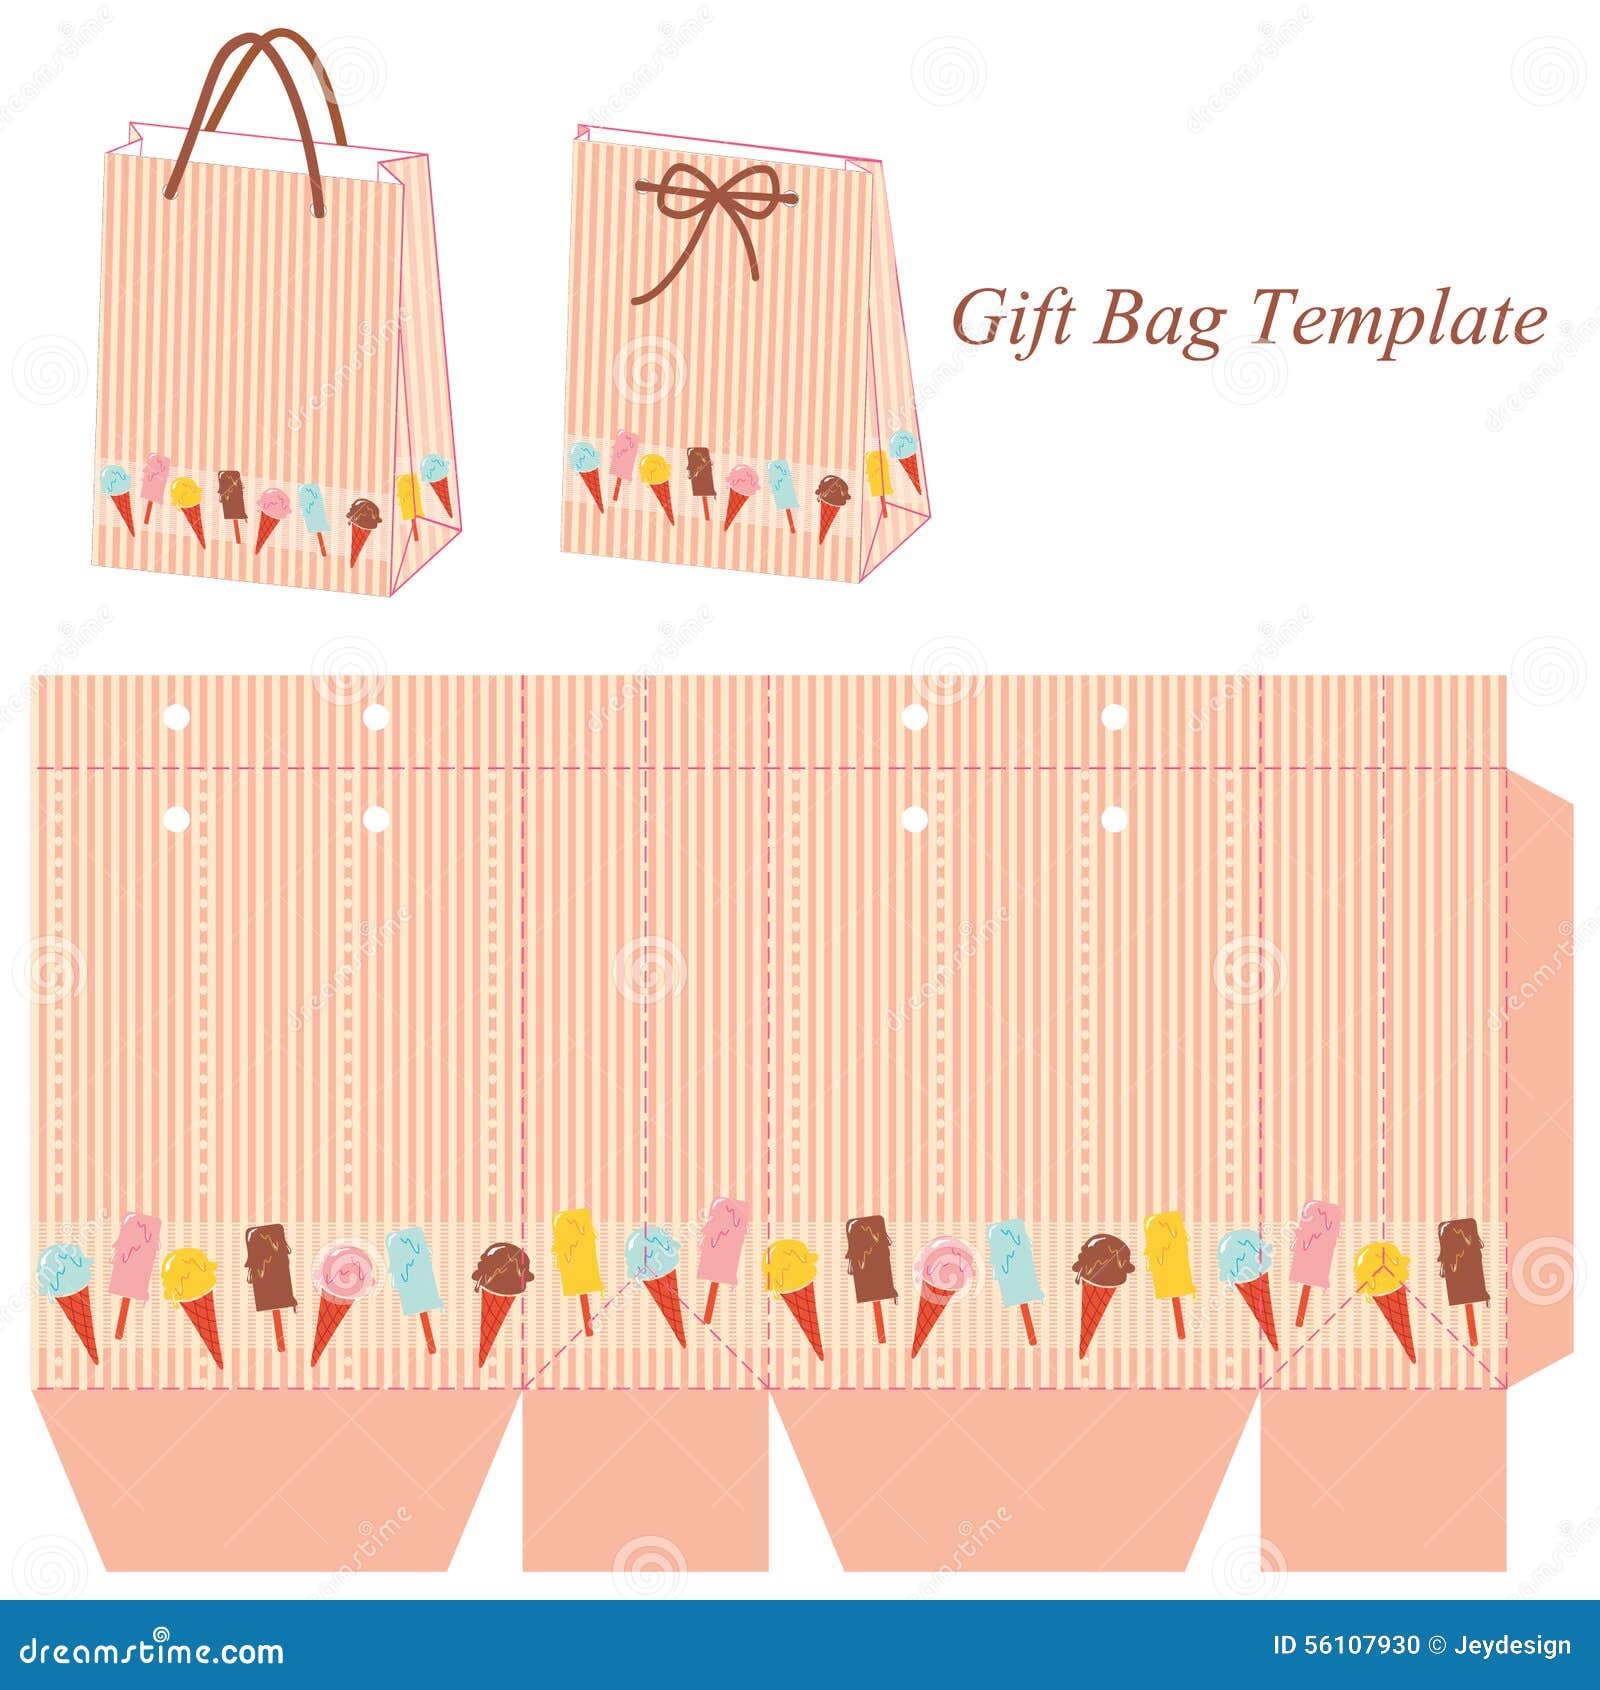 Gift Bag Template With Stripes And Colorful Ice Cream Stock Vector Illustration Of Isolated Elegant 56107930